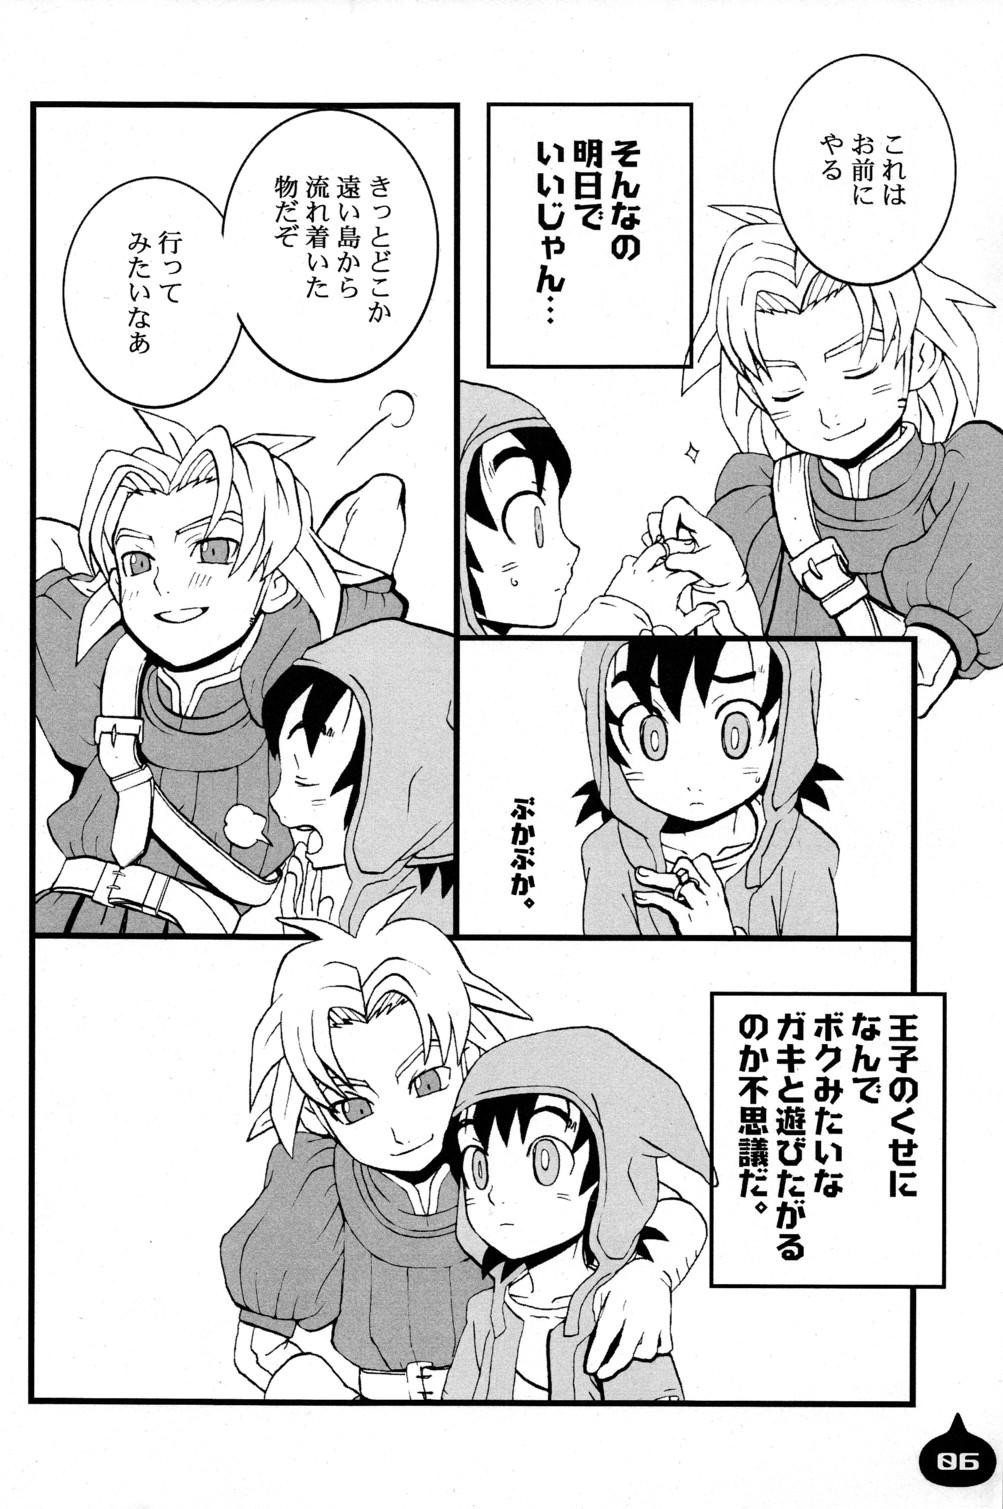 Missionary Position Porn LITTLE L - Dragon quest vii Lord of lords ryu knight | haou taikei ryuu knight Dando - Page 6